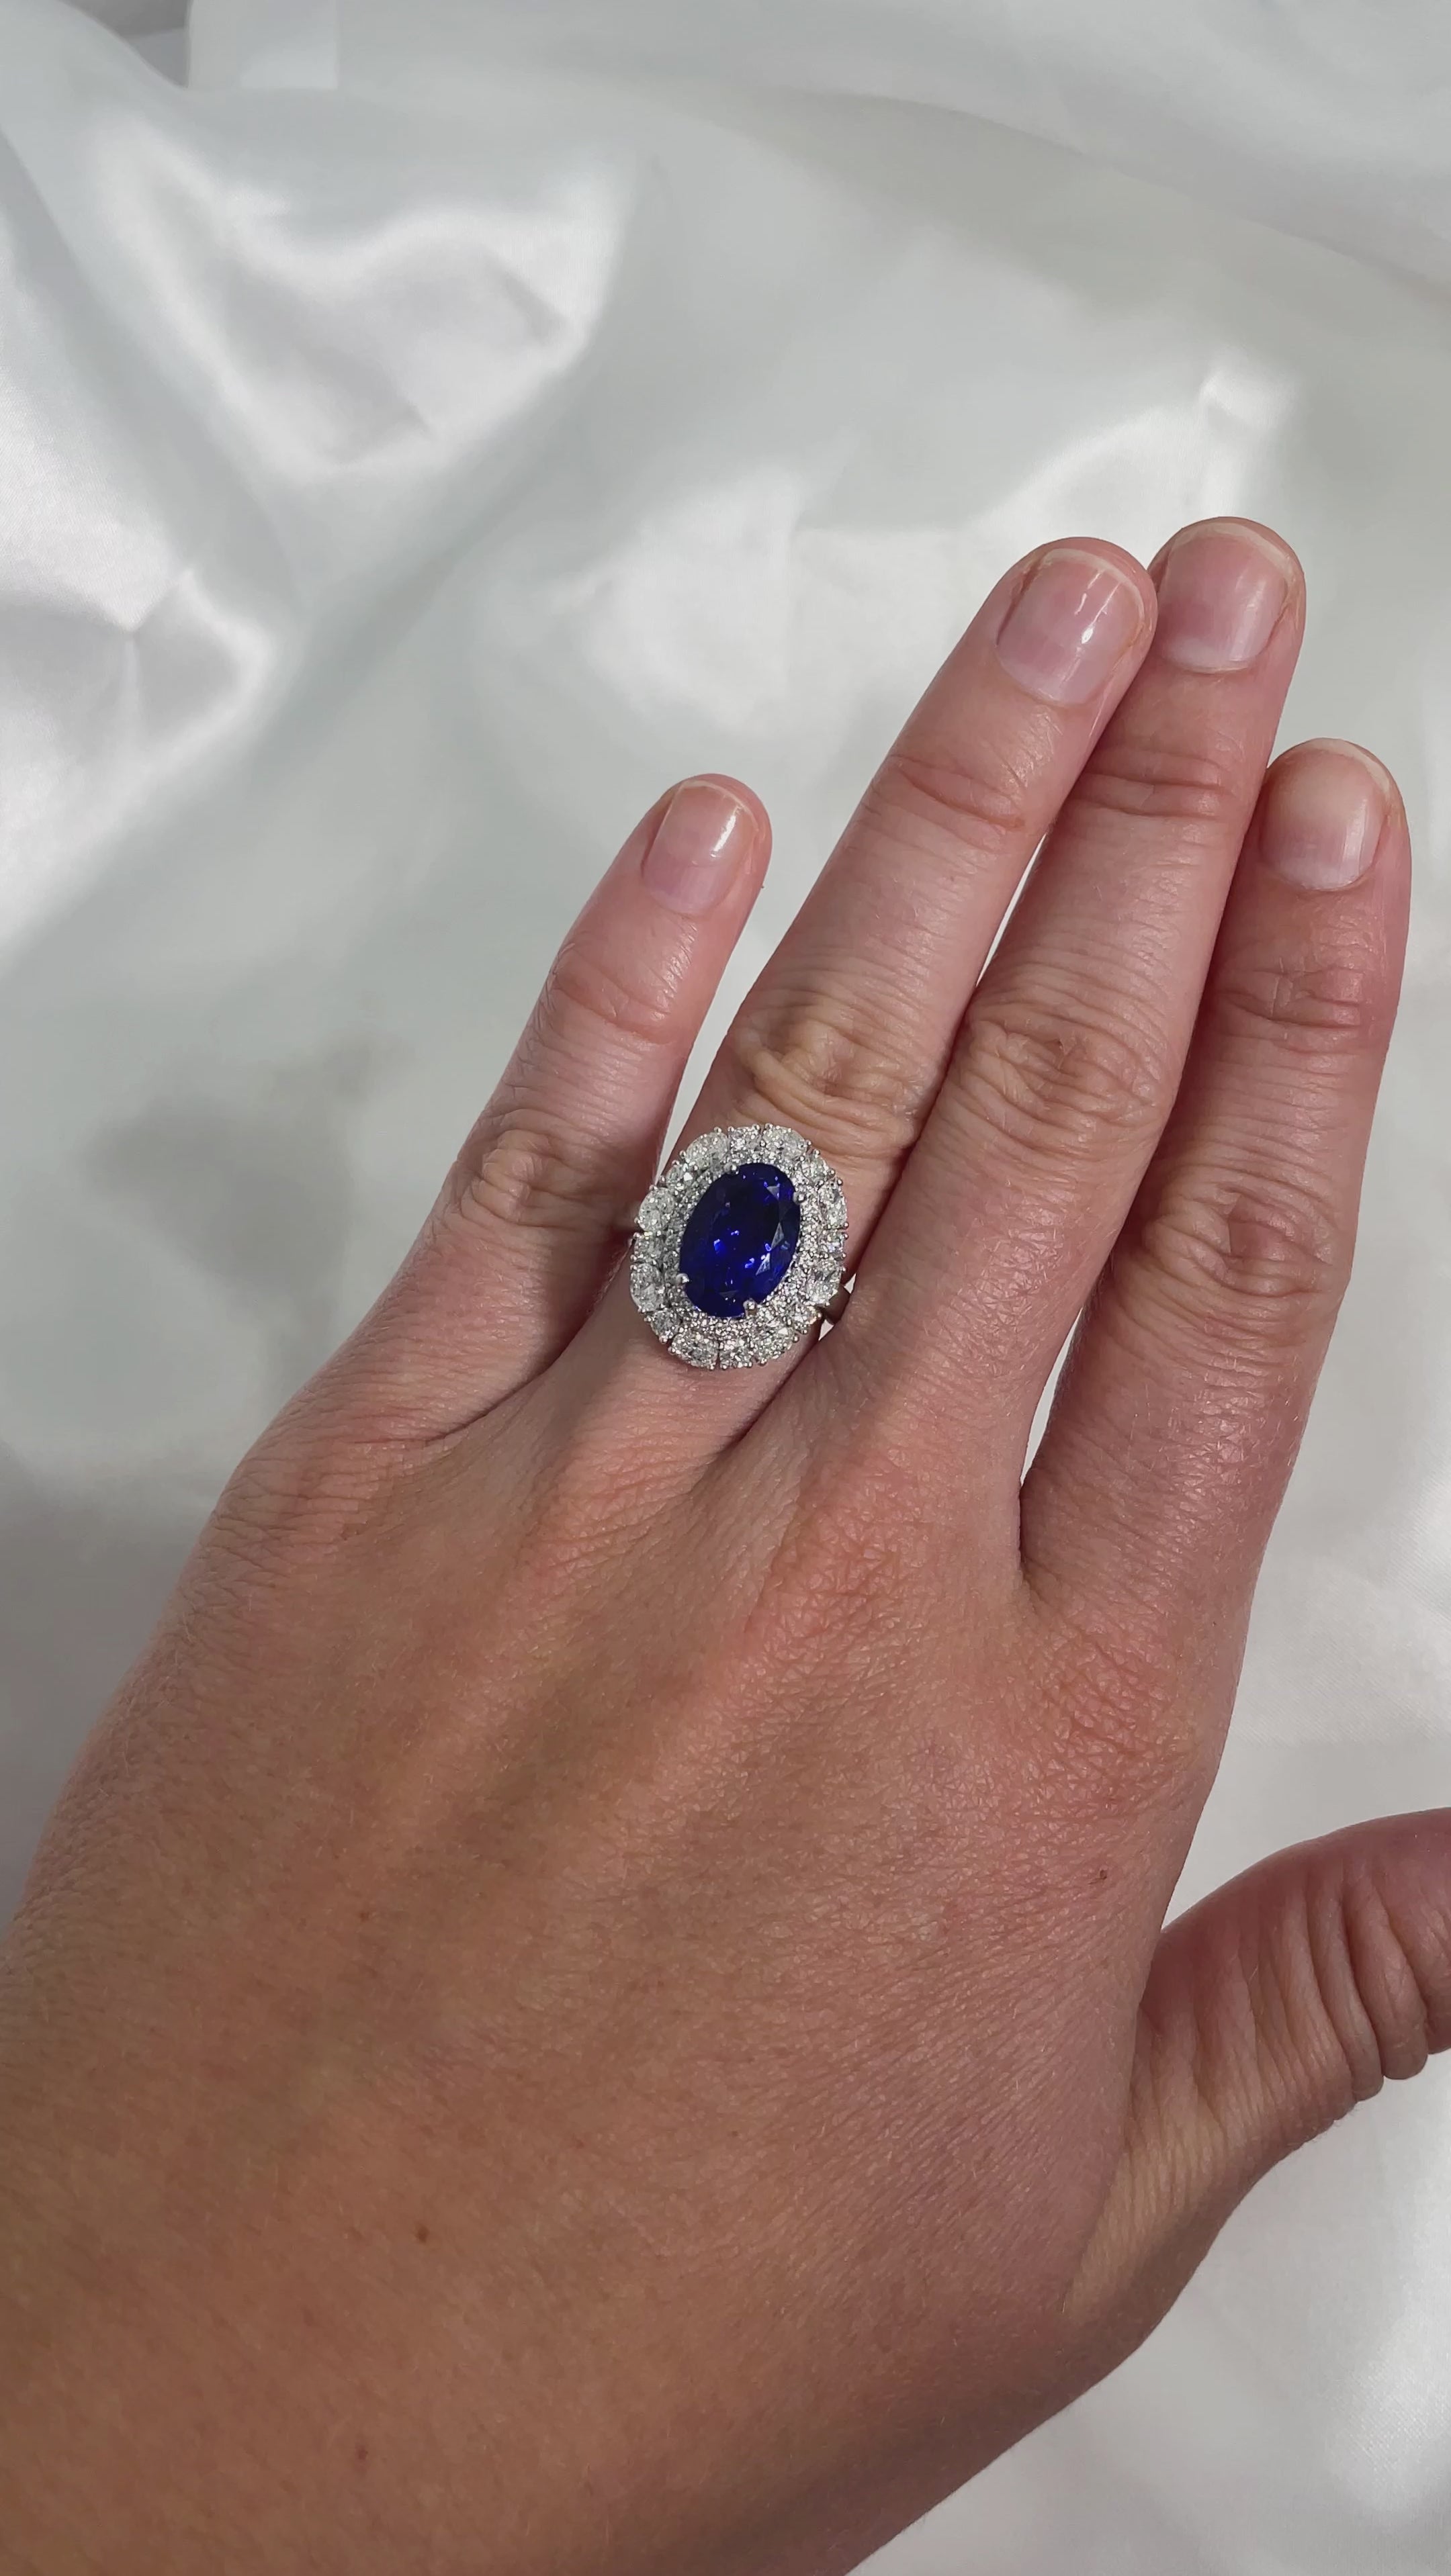 18CT WG 5.80CT OVAL TANZANITE AND DOUBLE DIAMOND HALO RING available at LeGassick Diamonds and Jewellery Gold Coast, Australia.